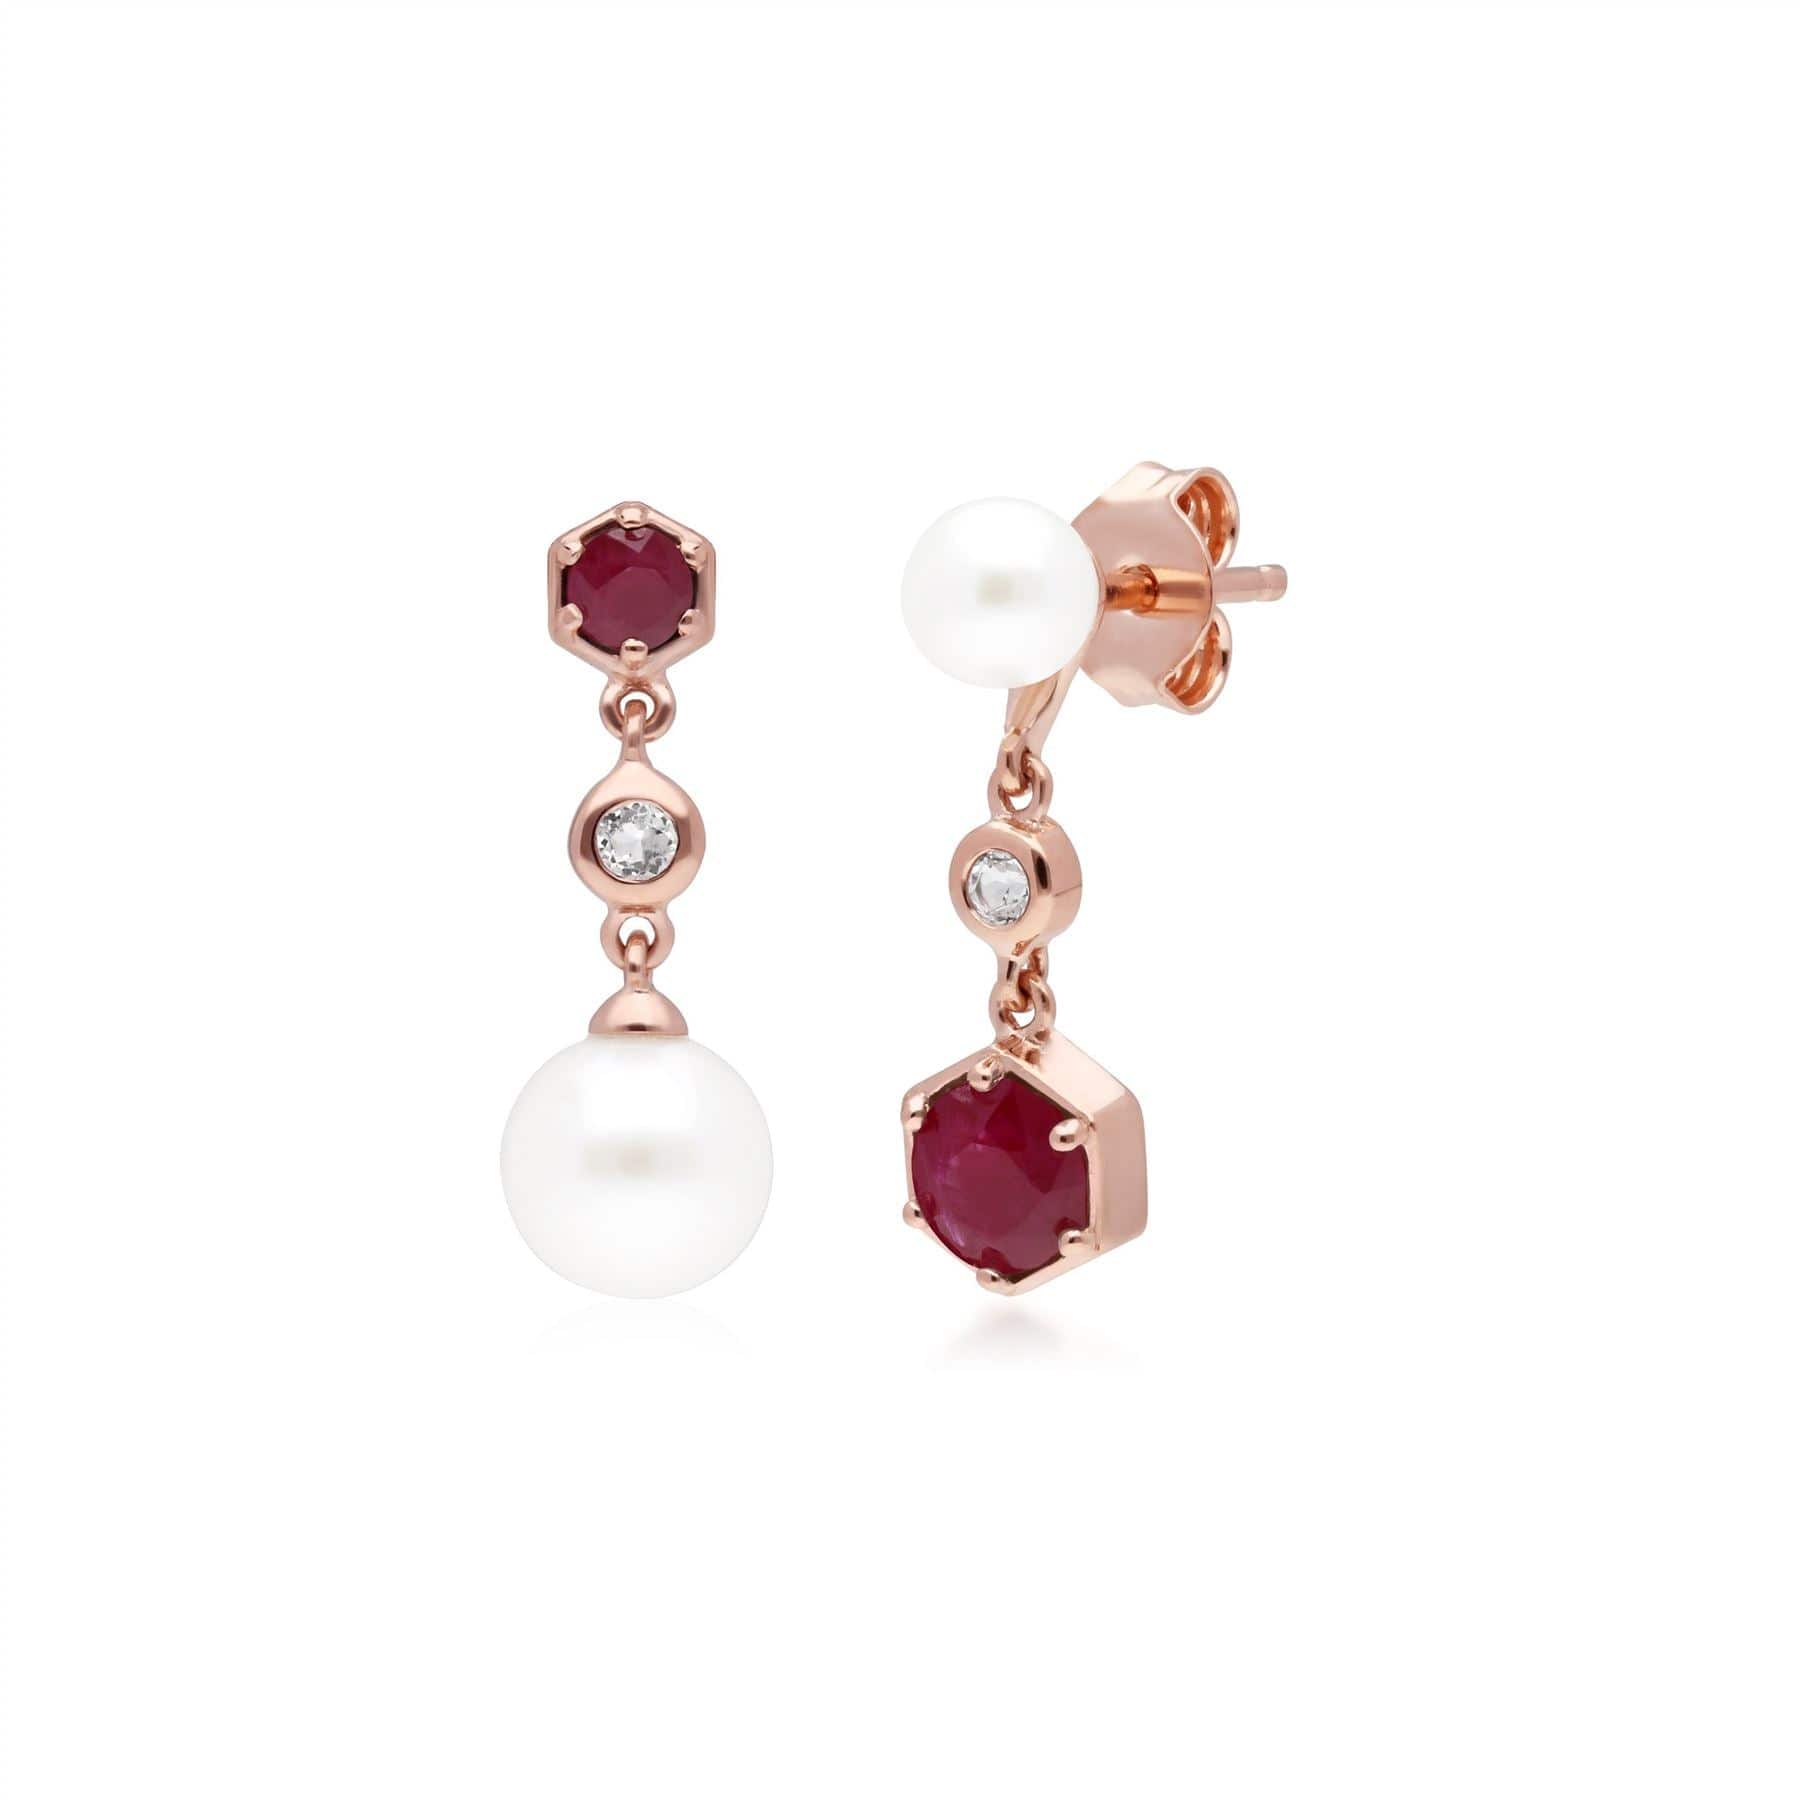 270E030302925 Modern Pearl, Ruby & Topaz Mismatched Drop Earrings in Rose Gold Plated  Silver 1